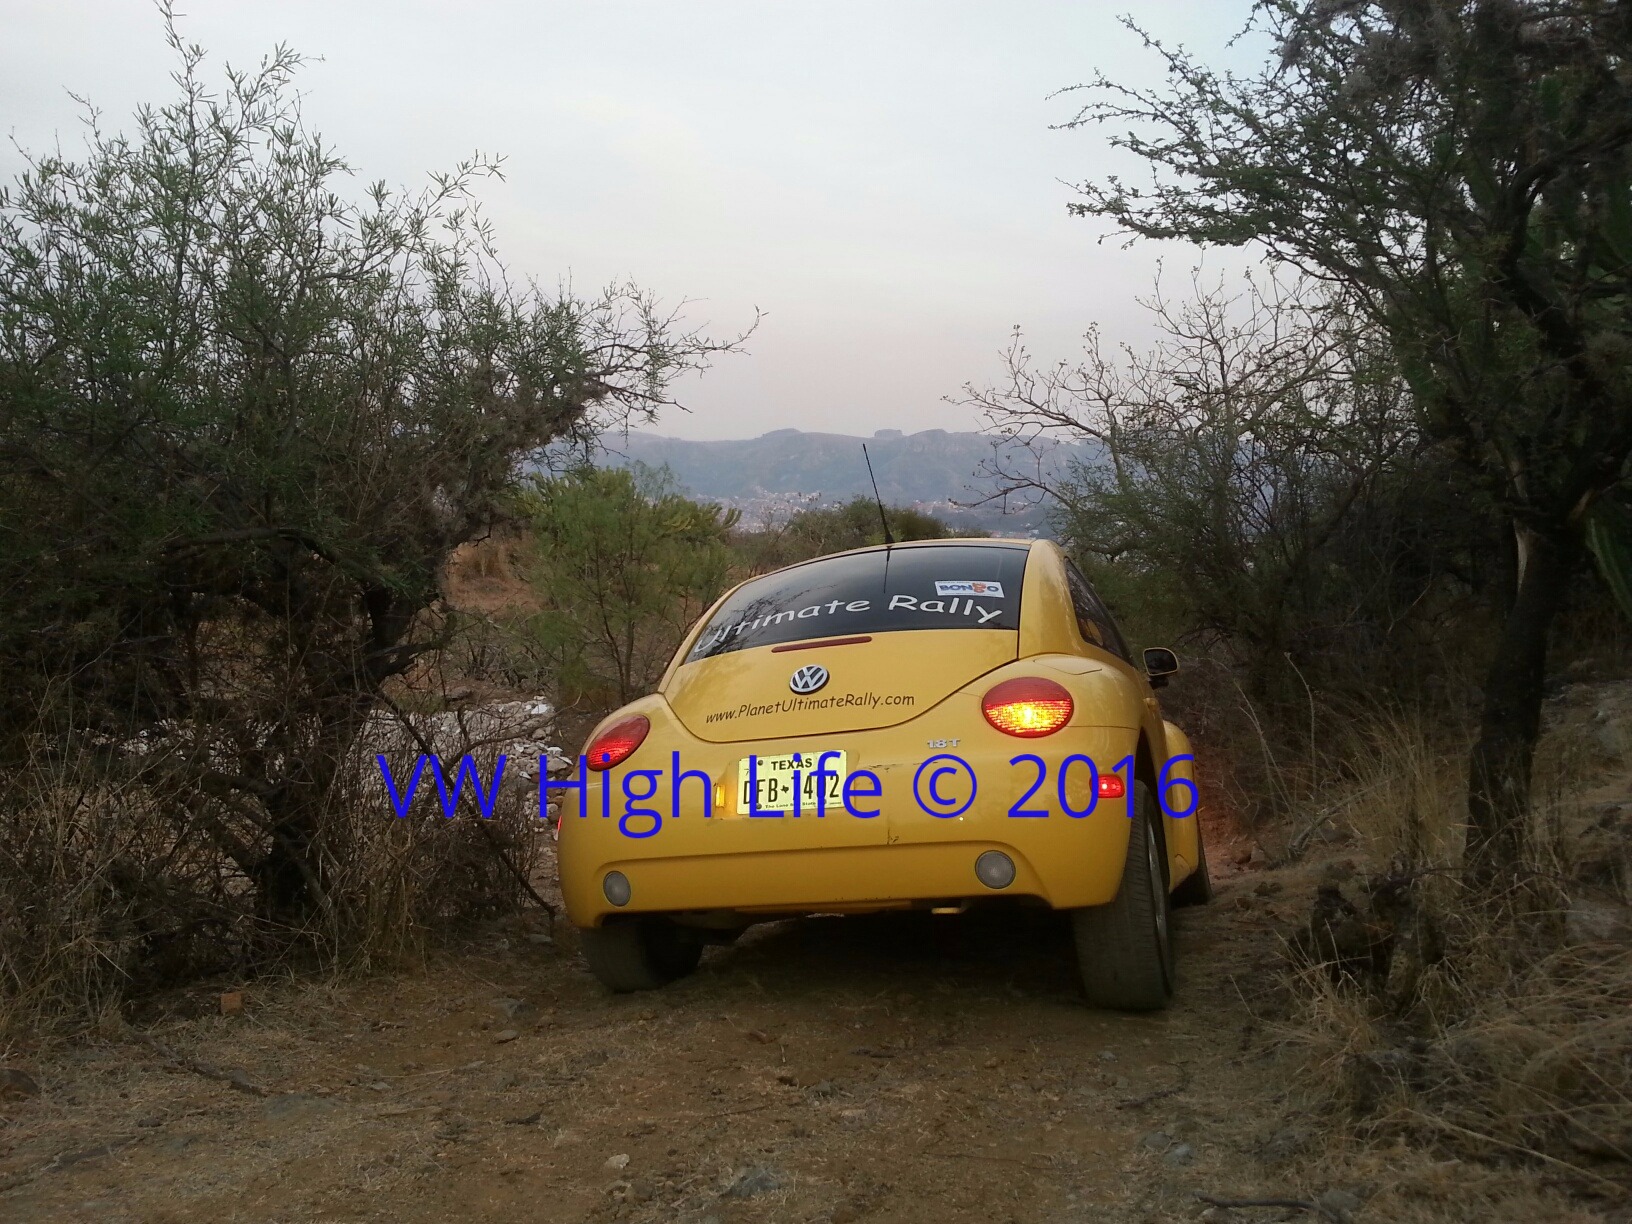 FIRST VW BEETLE MK4 LIFTED IN MEXICO IN 2014. TESTED ON WRC MEXICO TRAILS.